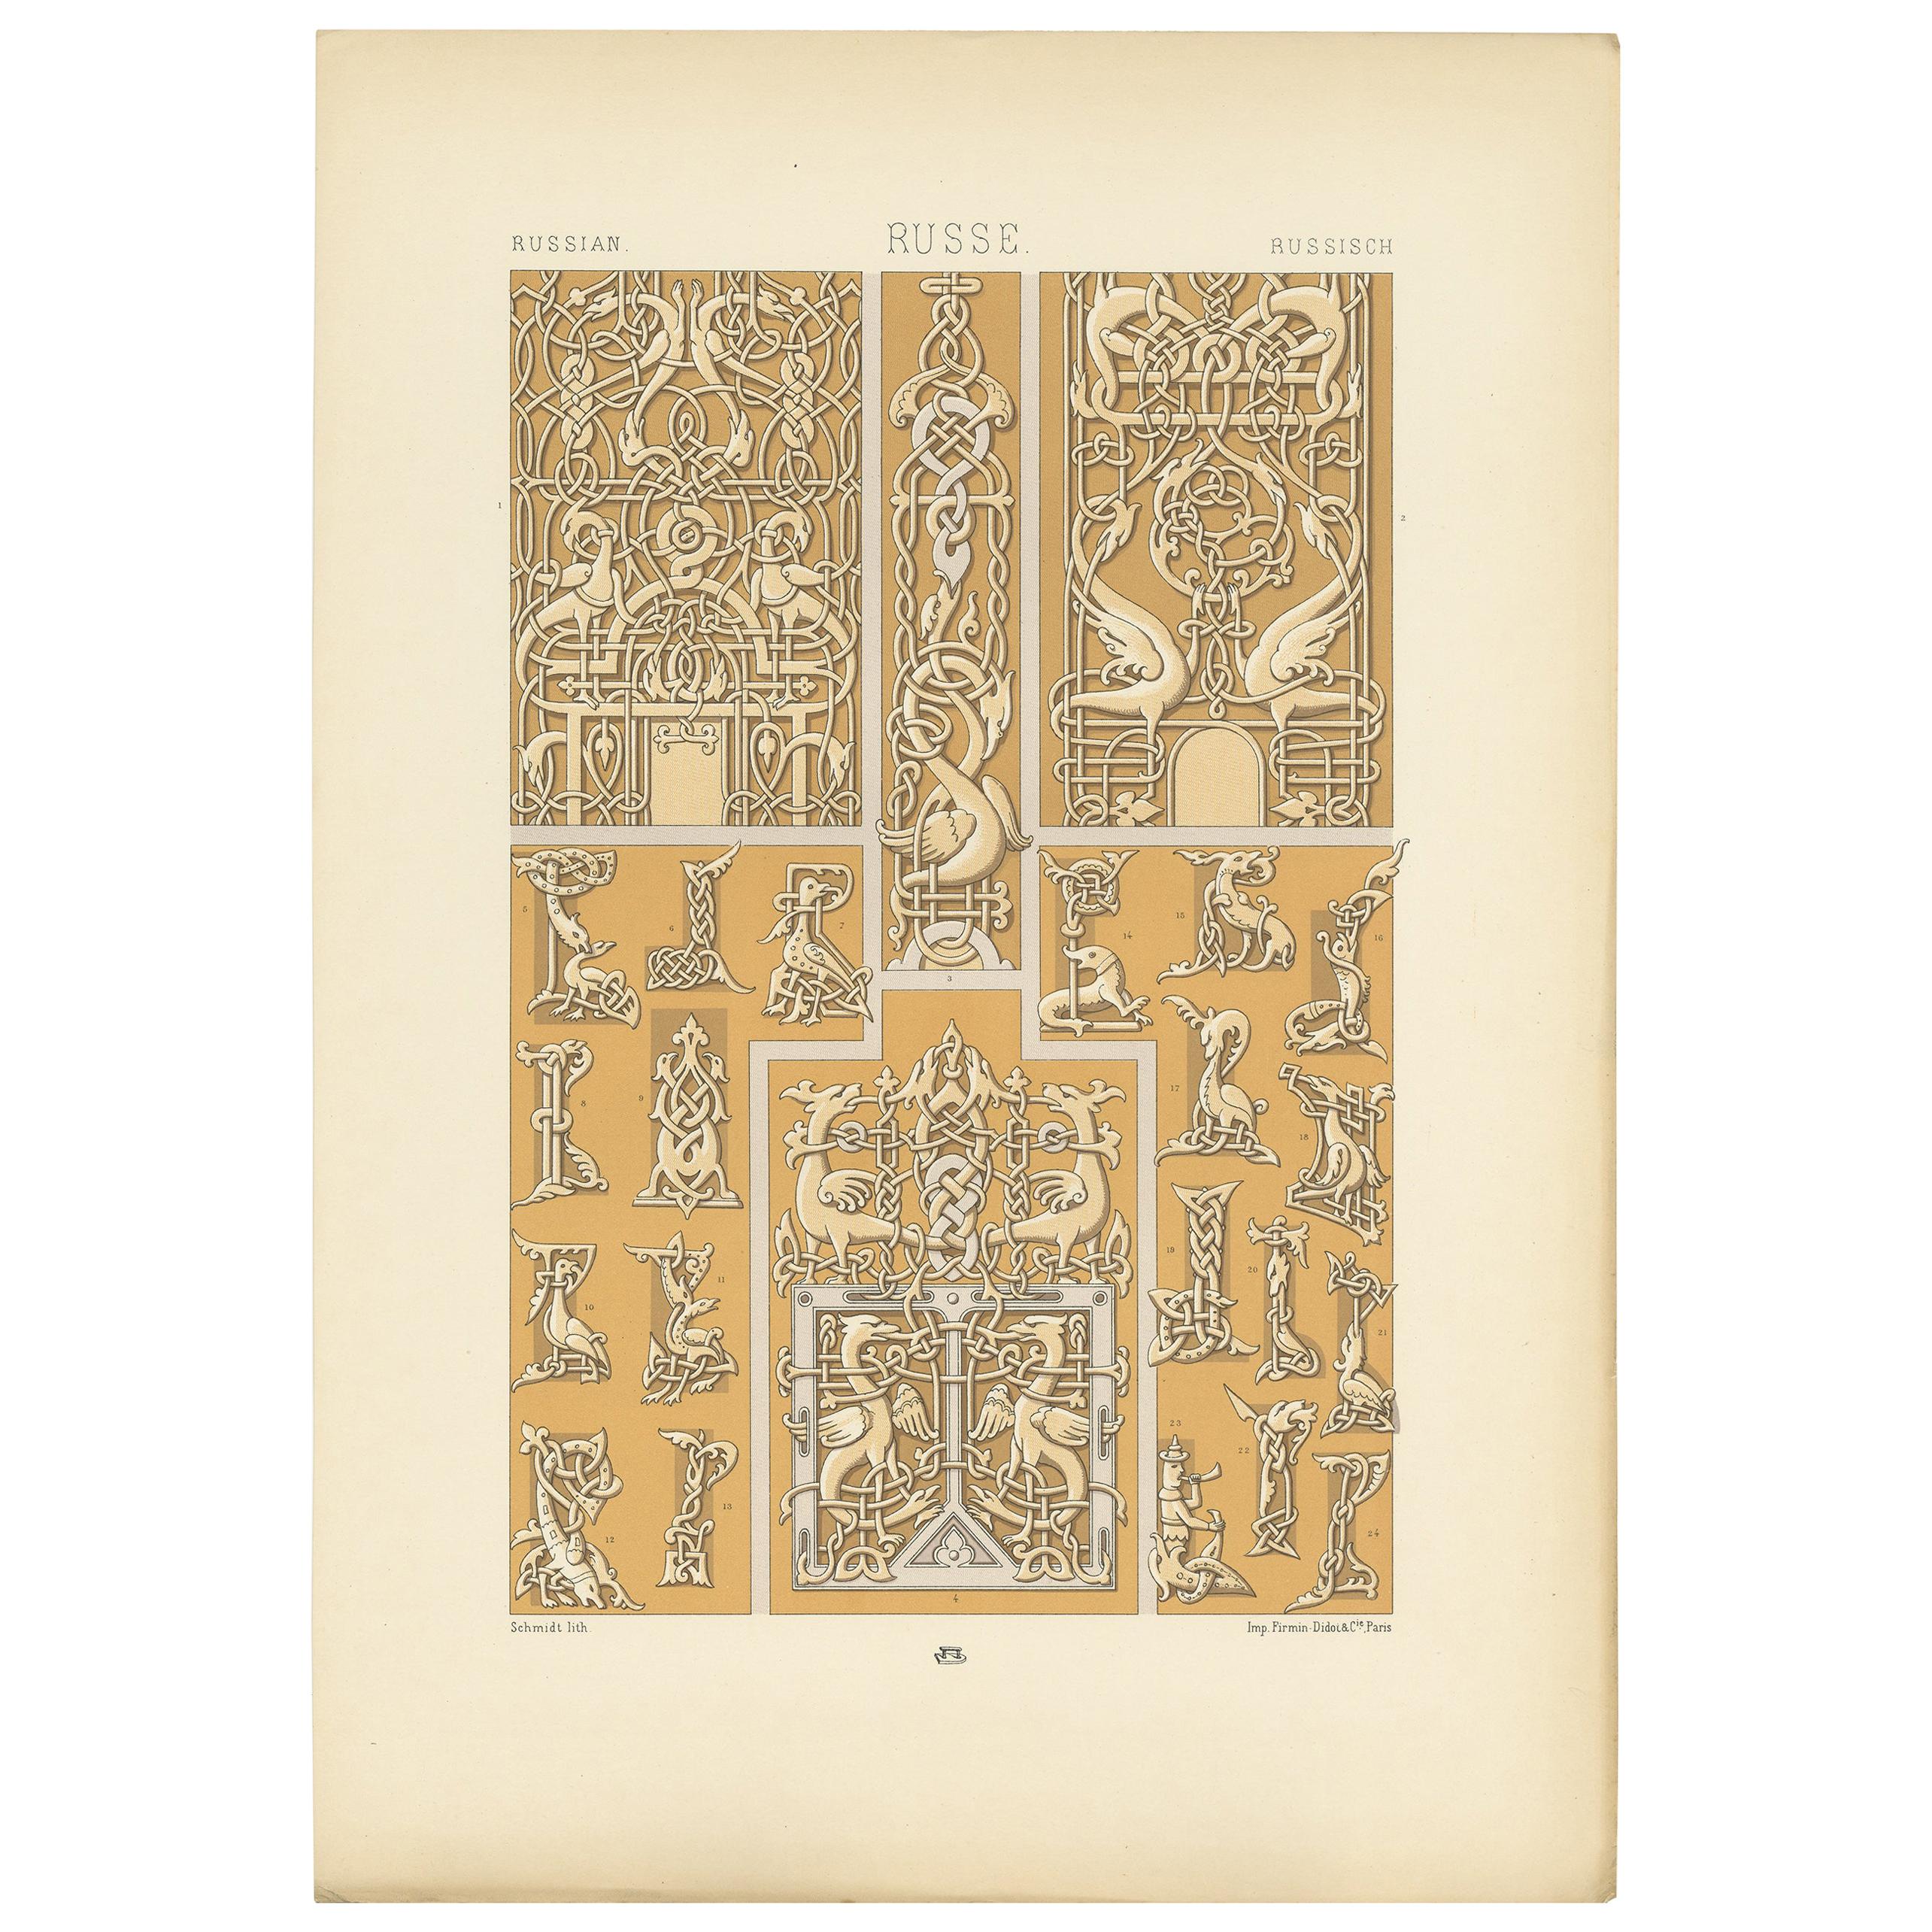 Pl. 65 Antique Print of Russian Ornaments from 14th Century by Racinet